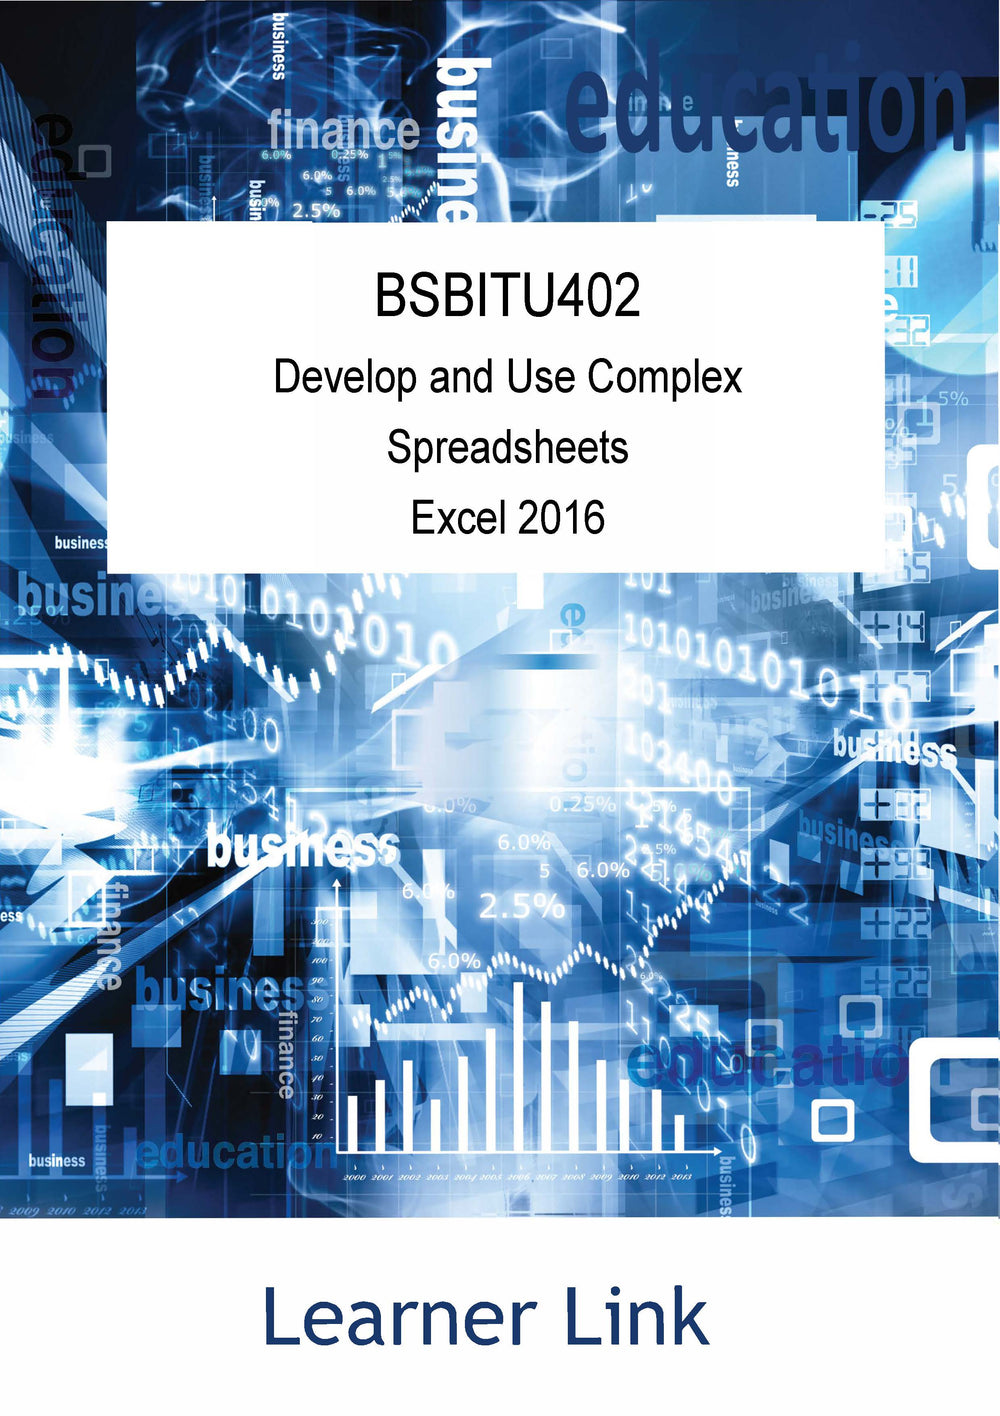 BSBITU402 Develop and Use Complex Spreadsheets Excel 2016